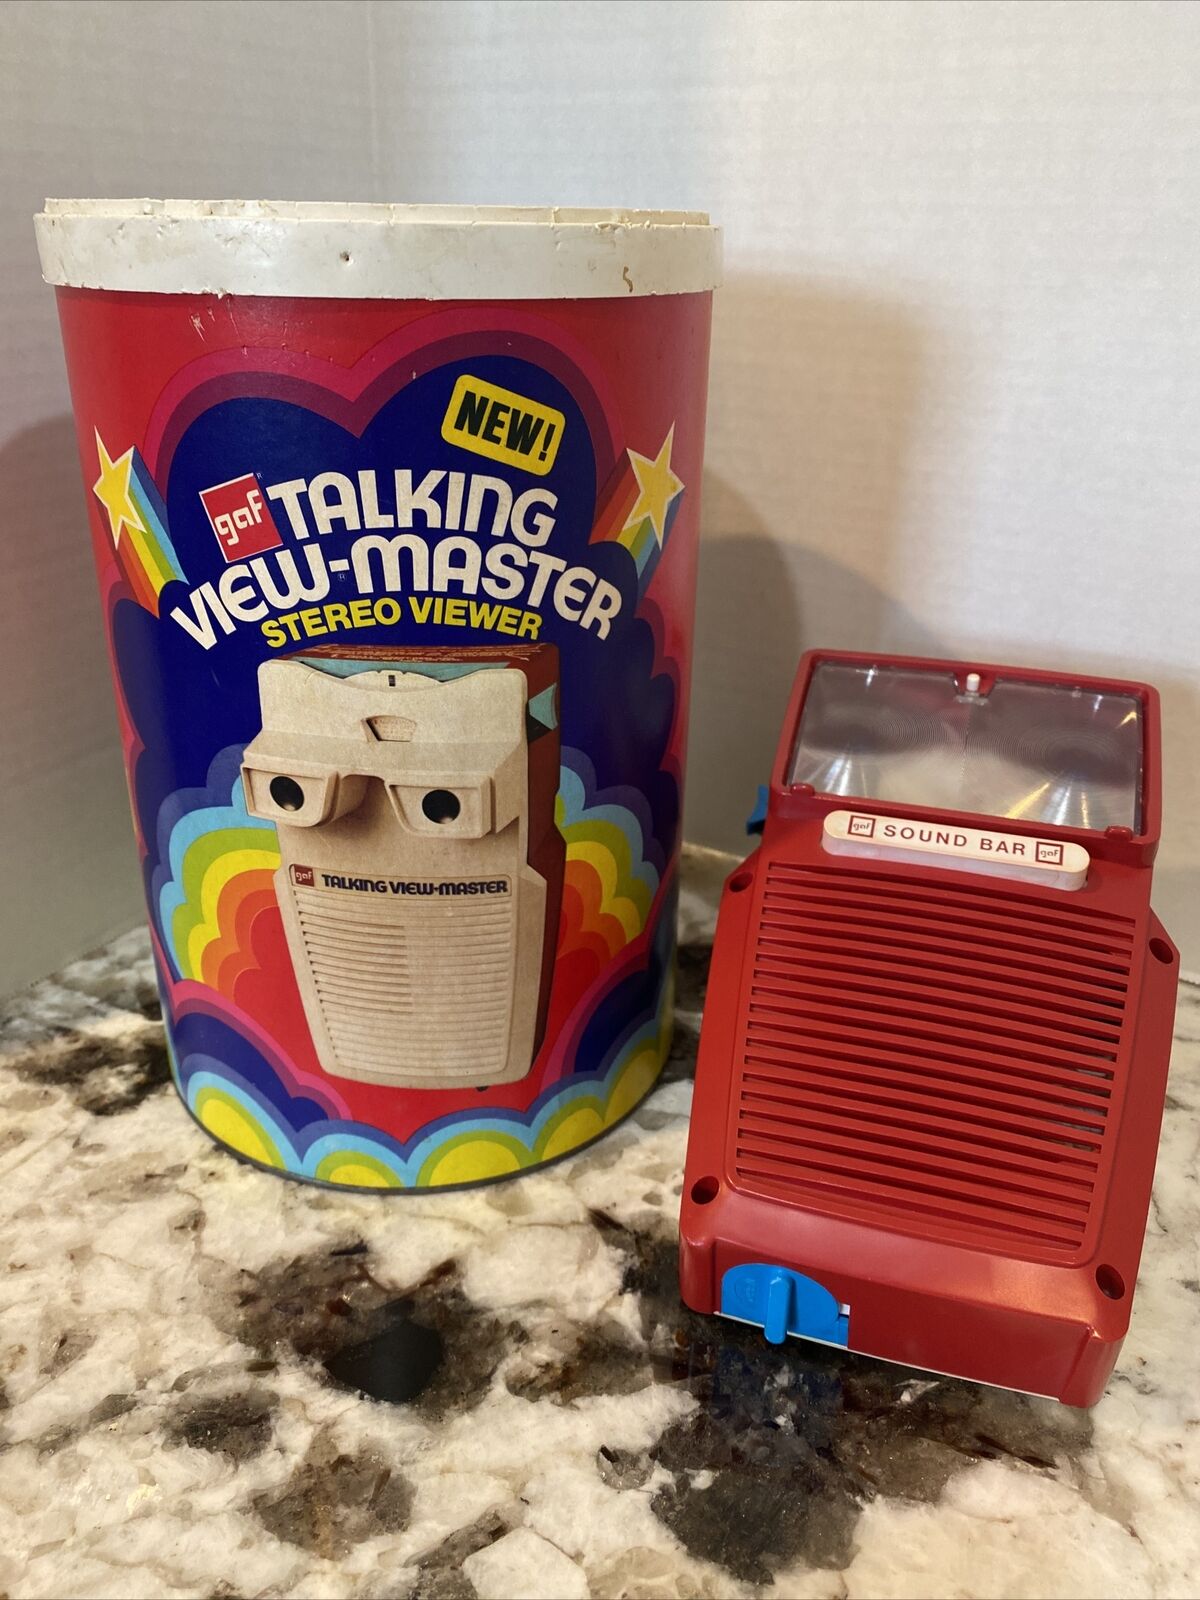 1973 GAF Talking View-Master STEREO VIEWER in Original Canister